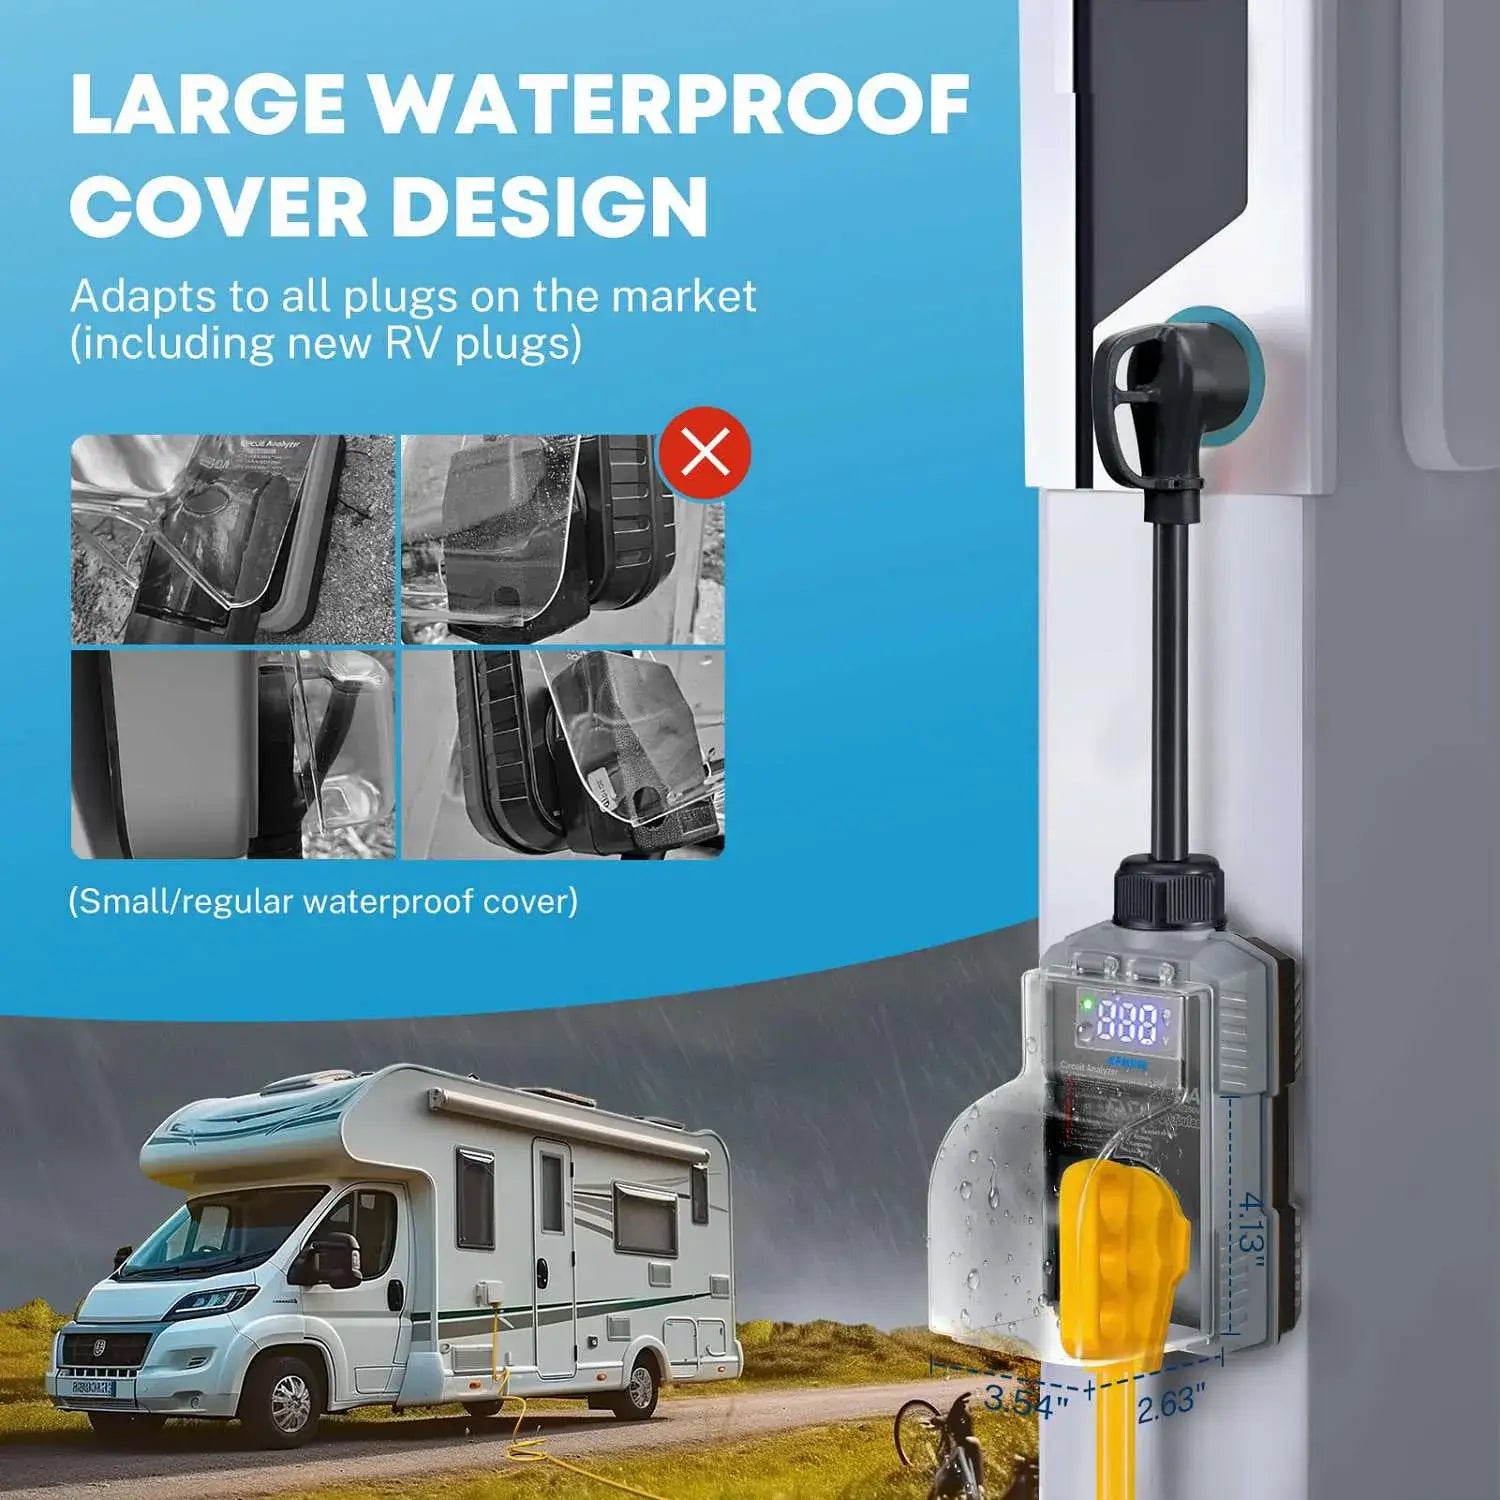 waterproof cover design for 30 amp rv surge protector